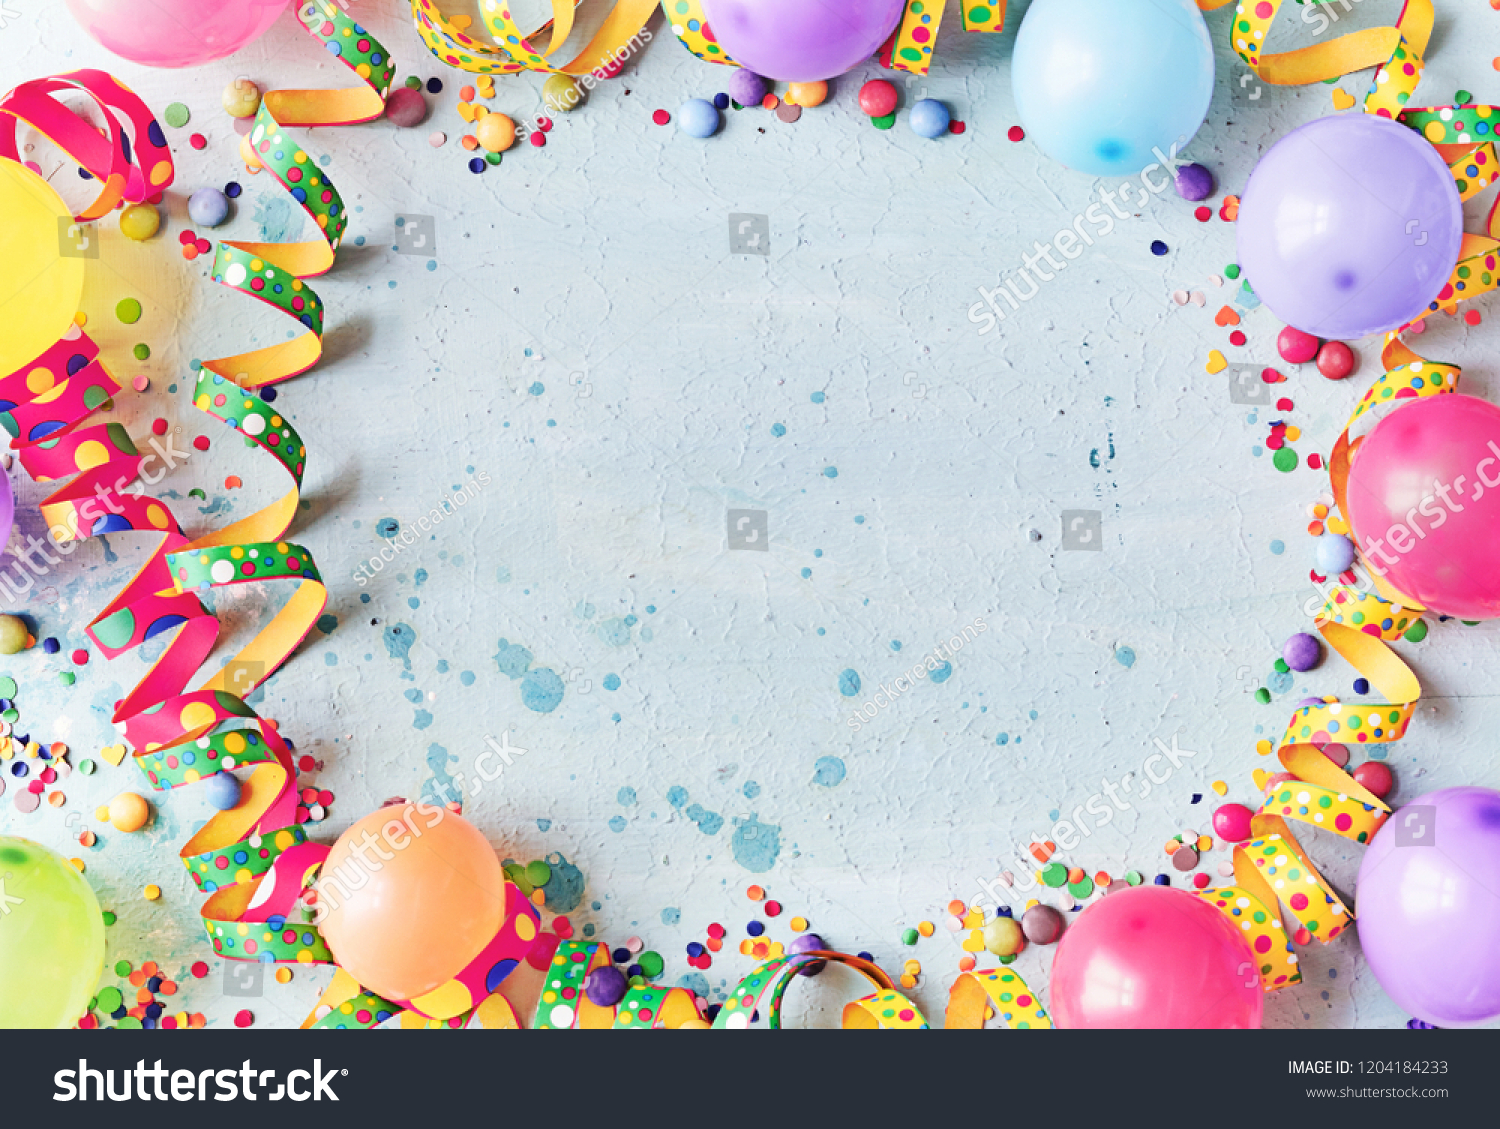 Multicolored carnival or birthday background on blue with a frame of colorful party balloons, streamers, confetti and candy around central copy space #1204184233